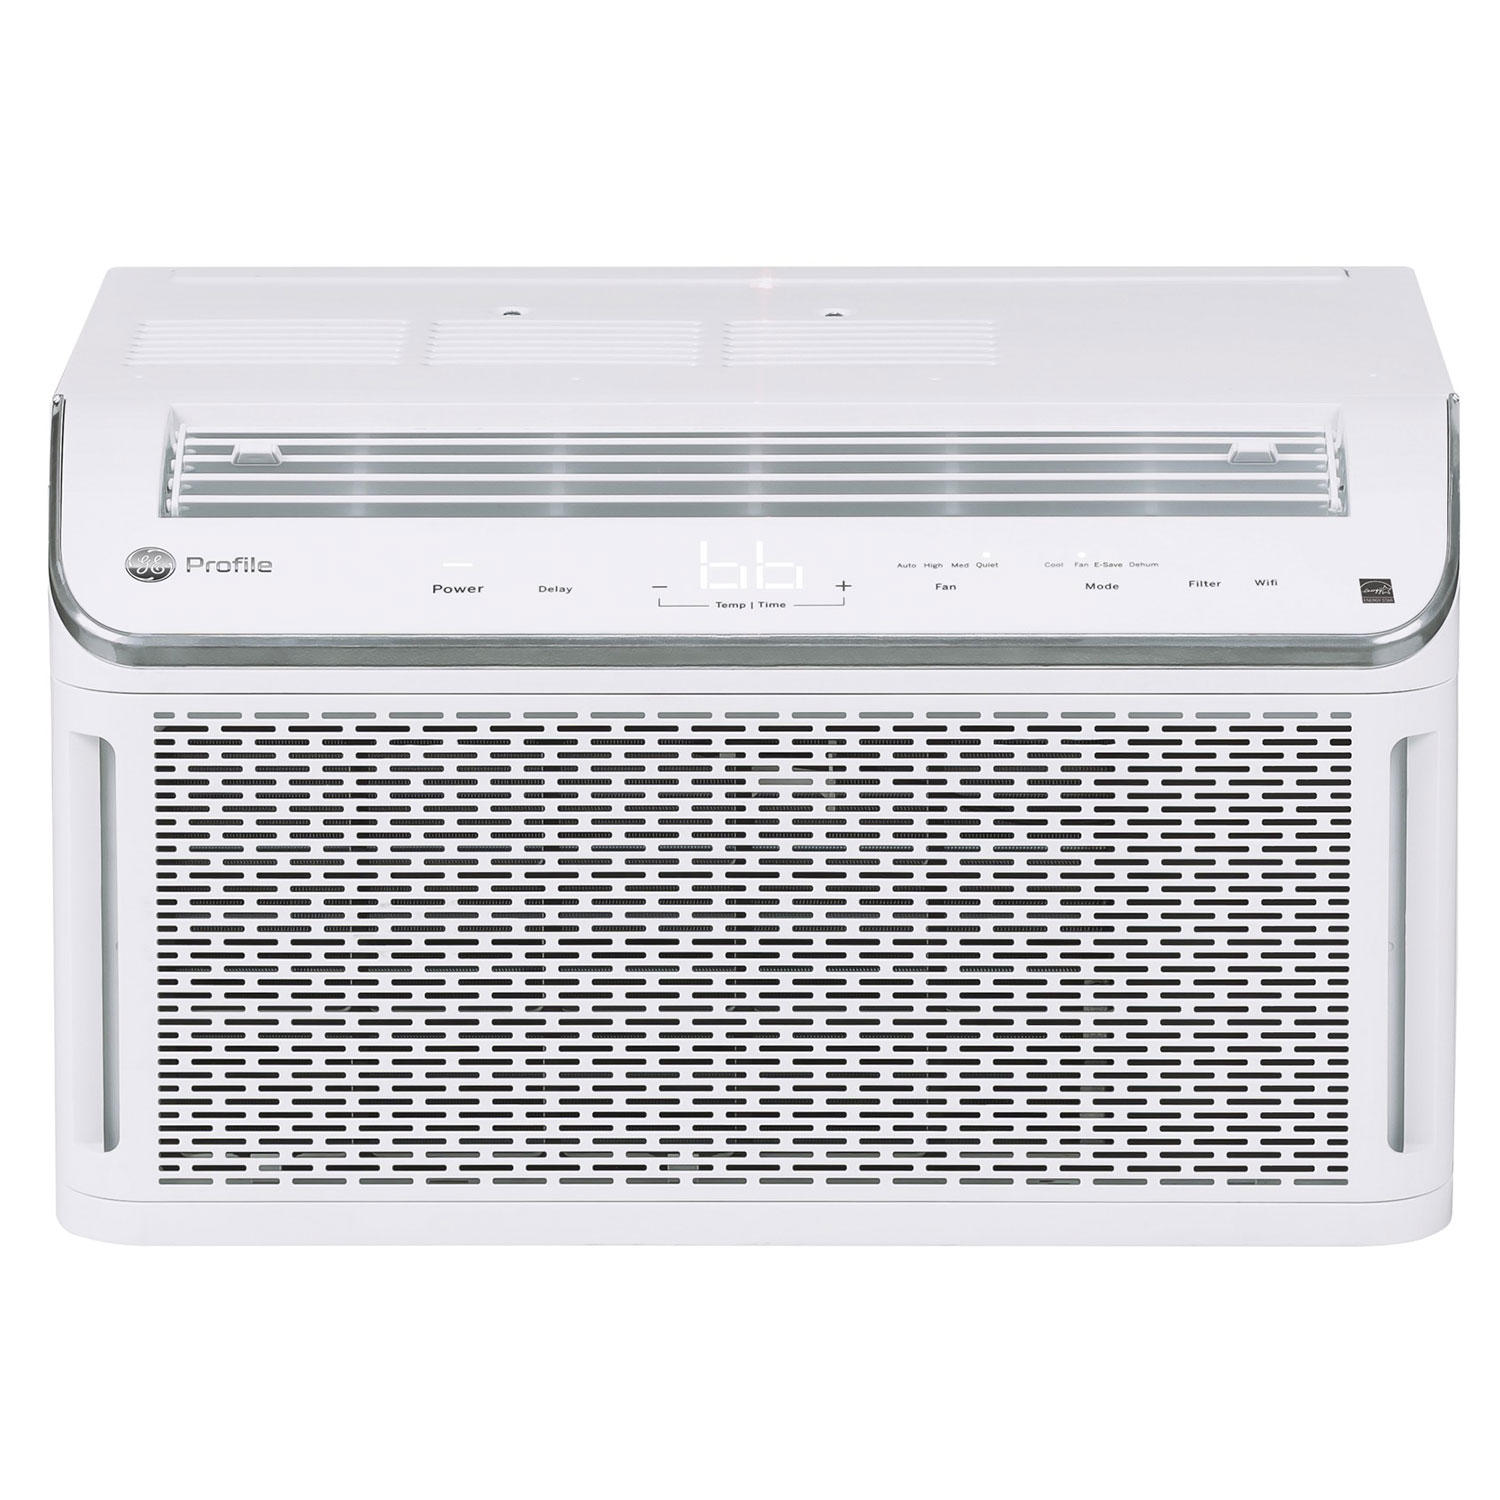 GE Profile PHC08LY ENERGY STAR 8,100 BTU 115 Volt Smart Window Room Air Conditioner with Wi-Fi